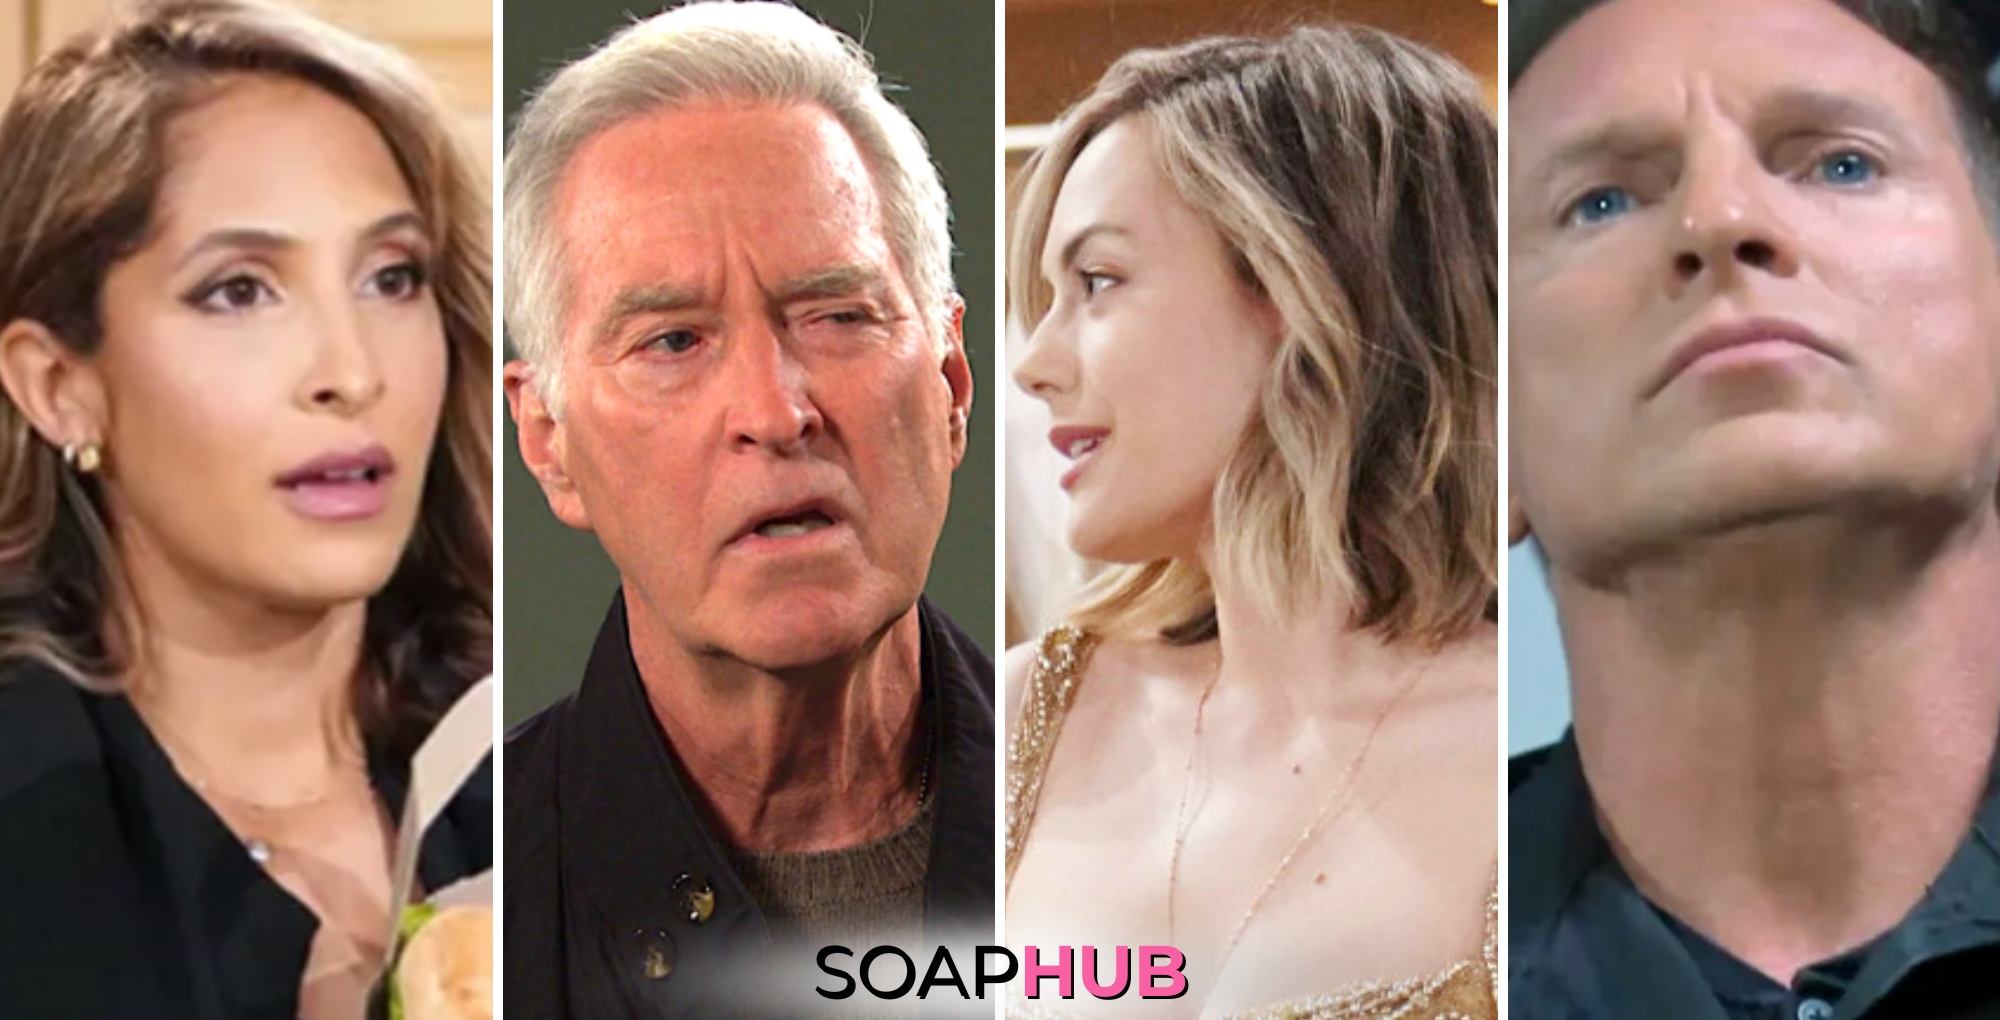 lily on the young and the restless, john on days of our lives, hope on the bold and the beautiful, and jason on general hospital with the Soap Hub logo across the bottom.